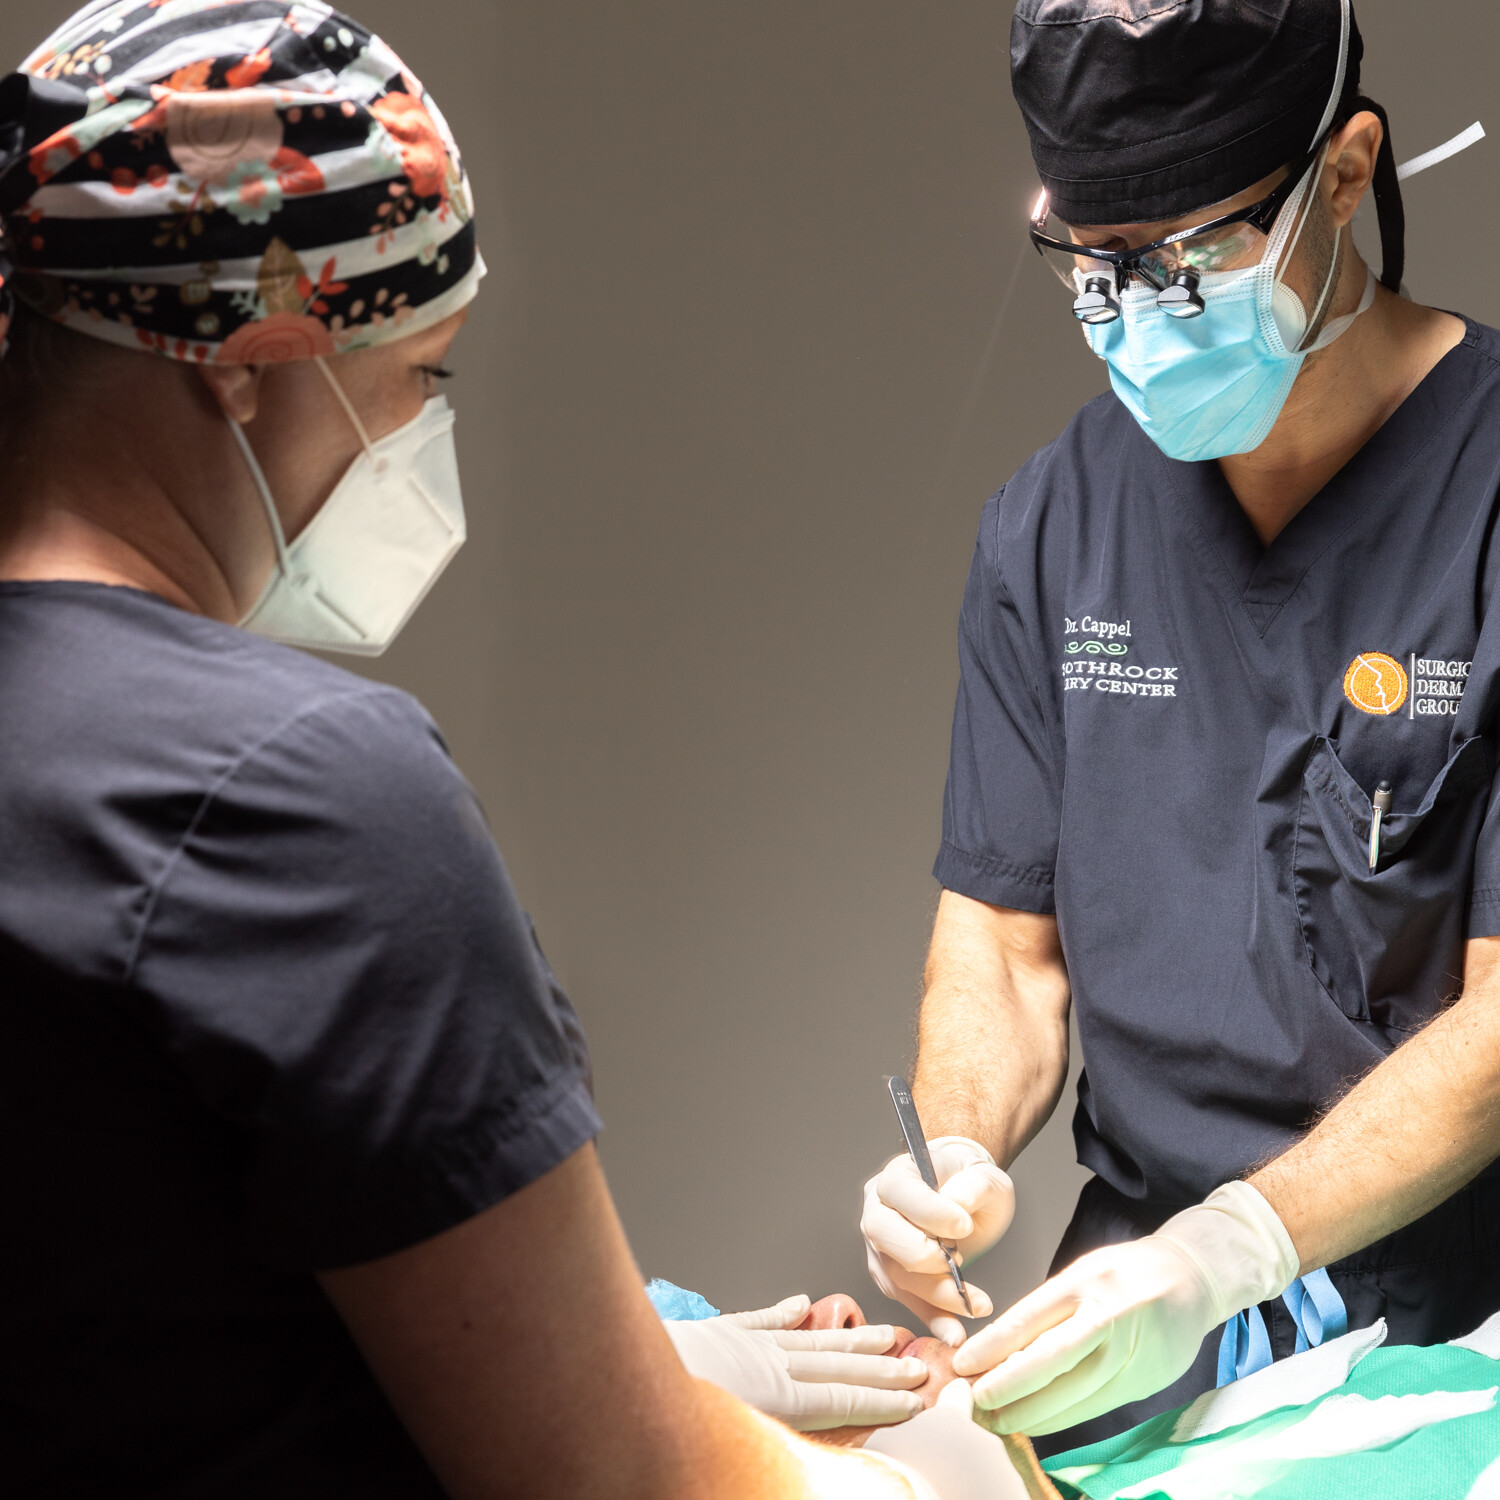 Dr. Cappel in surgery with another medical provider at Surgical Dermatology Group